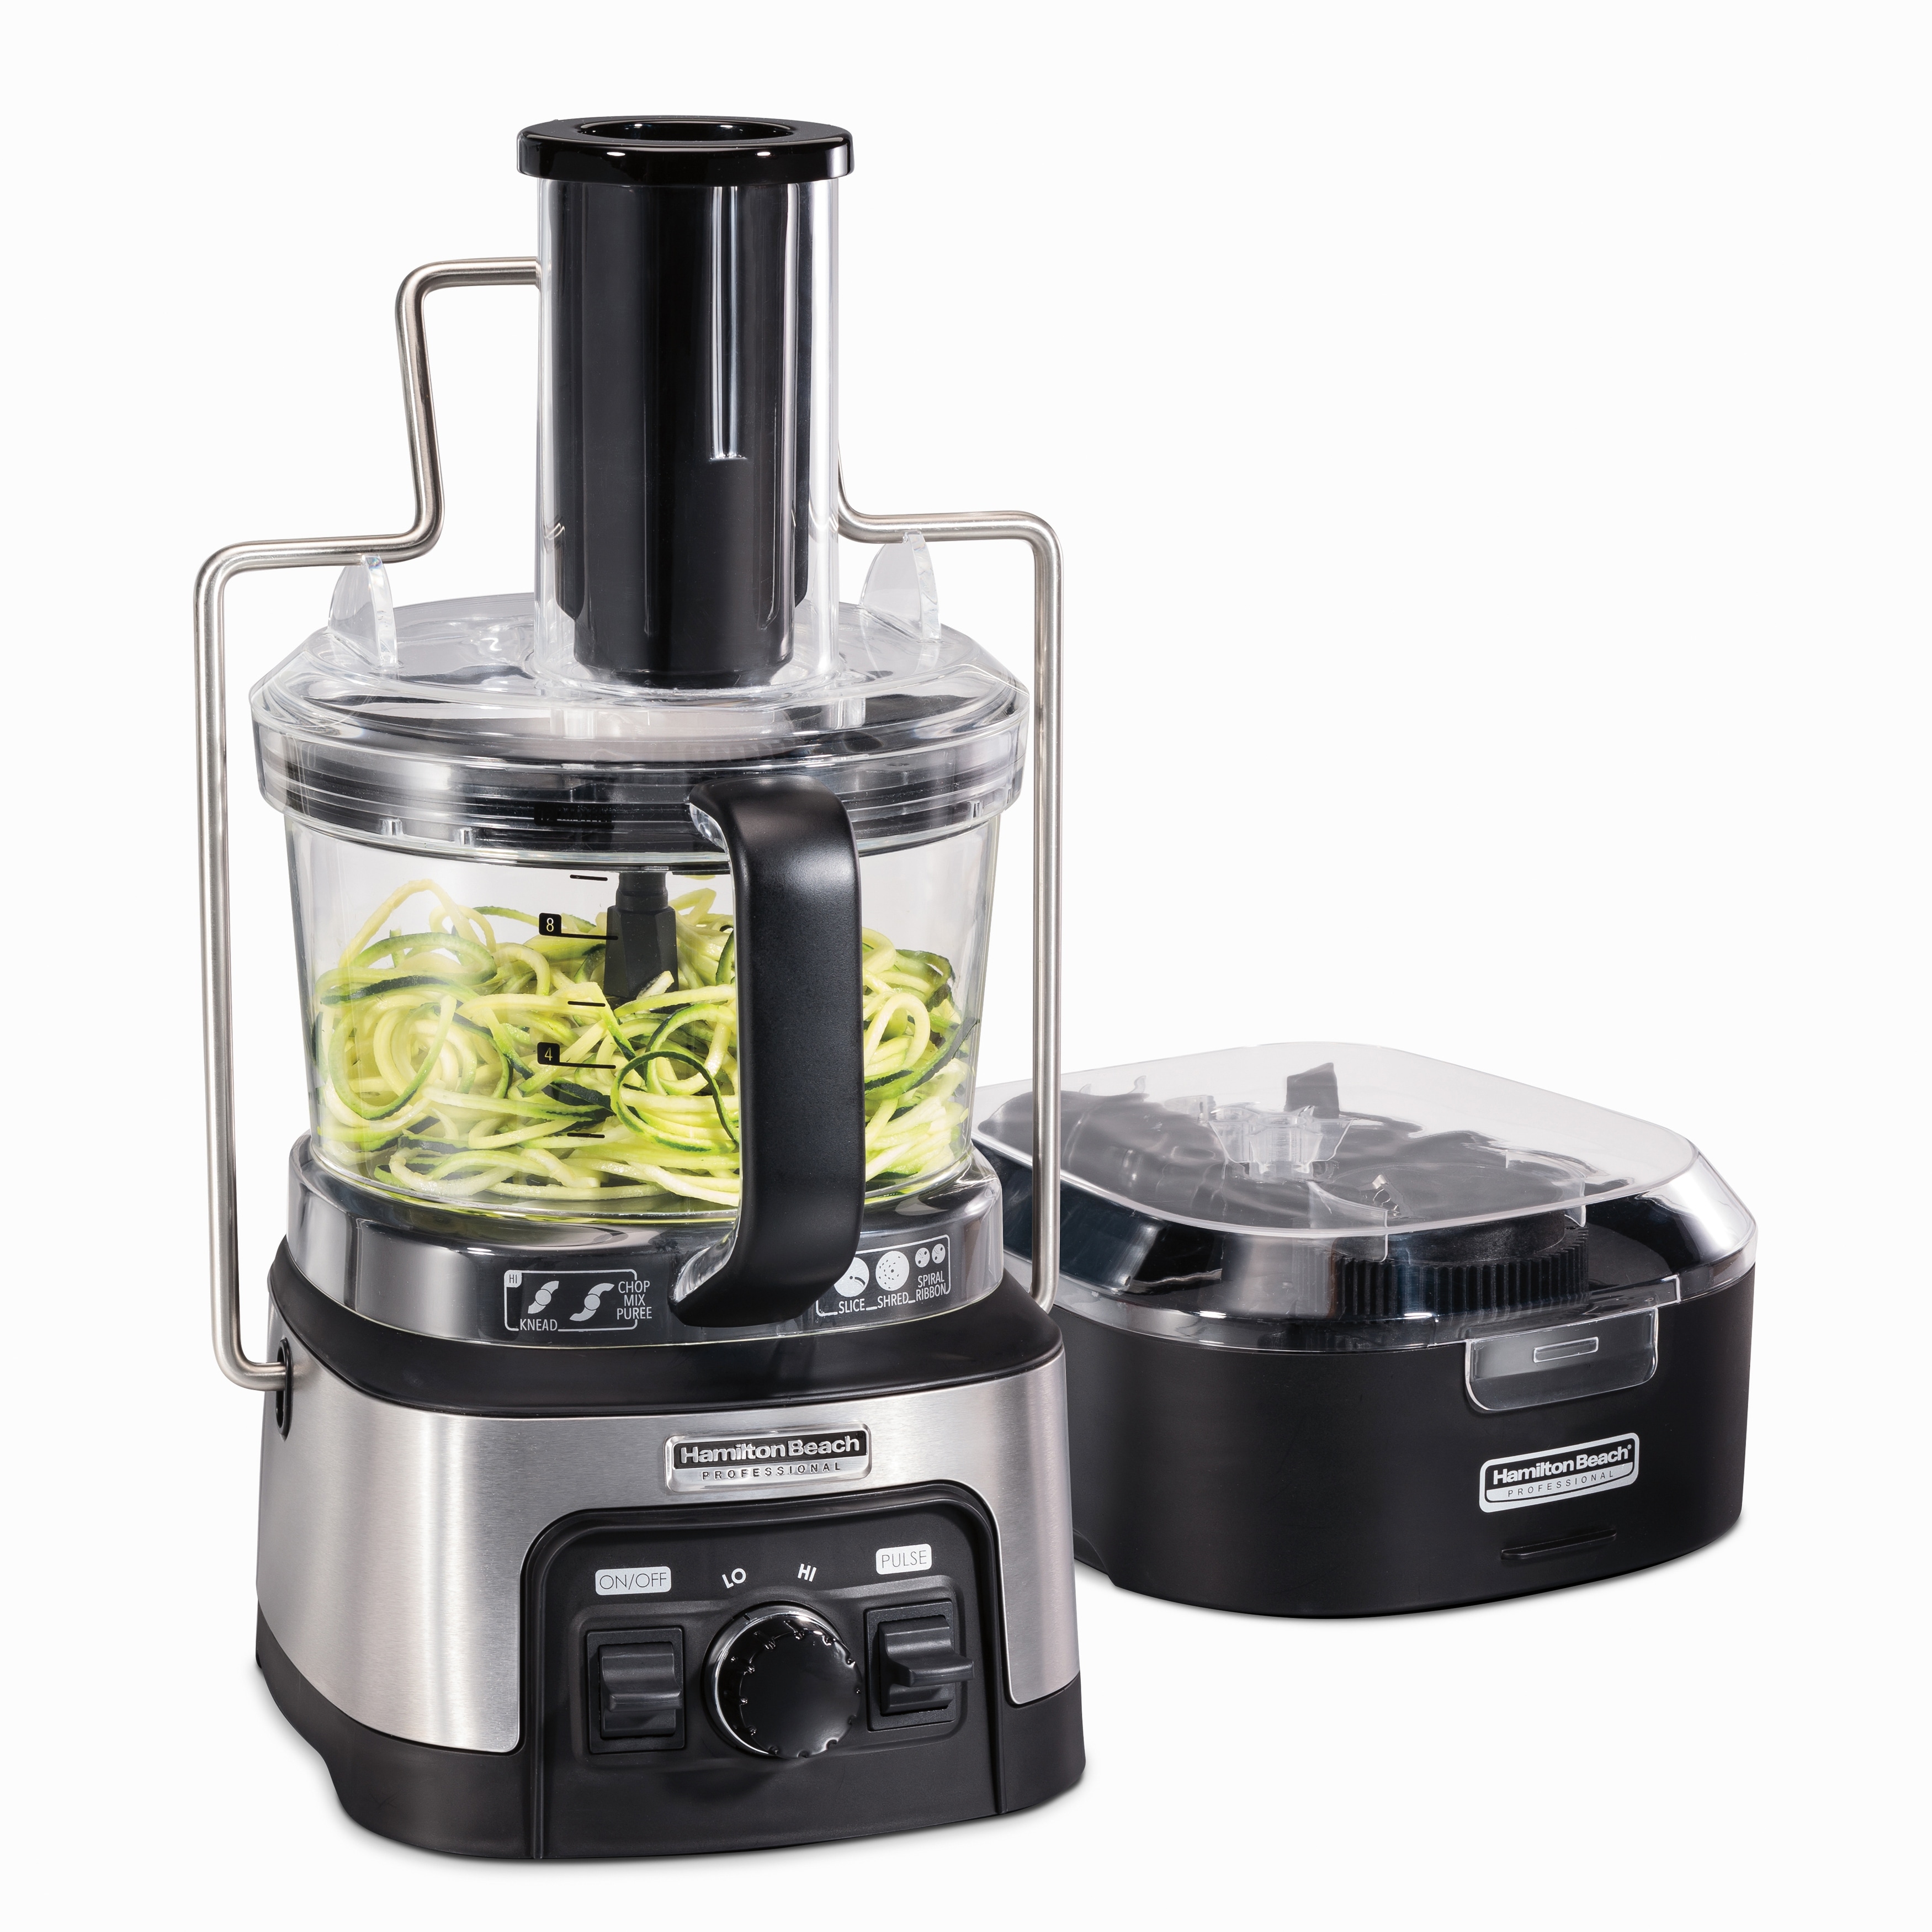 Hamilton Beach Professional 4-in-1 Juicer Mixer Grinder for Sale